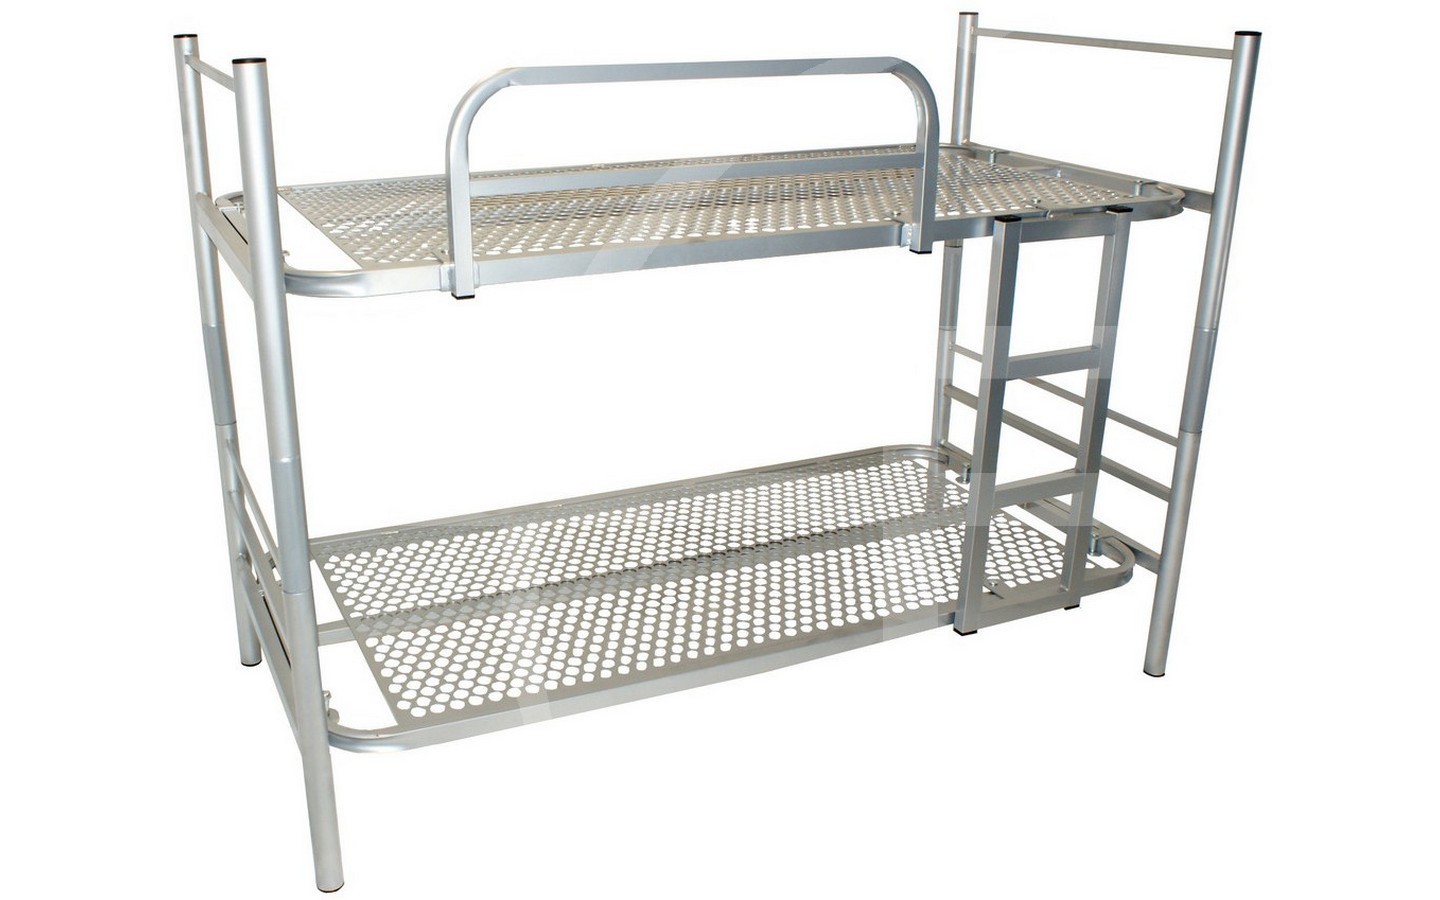 Bunk Beds For S Steel, Military Bunk Beds